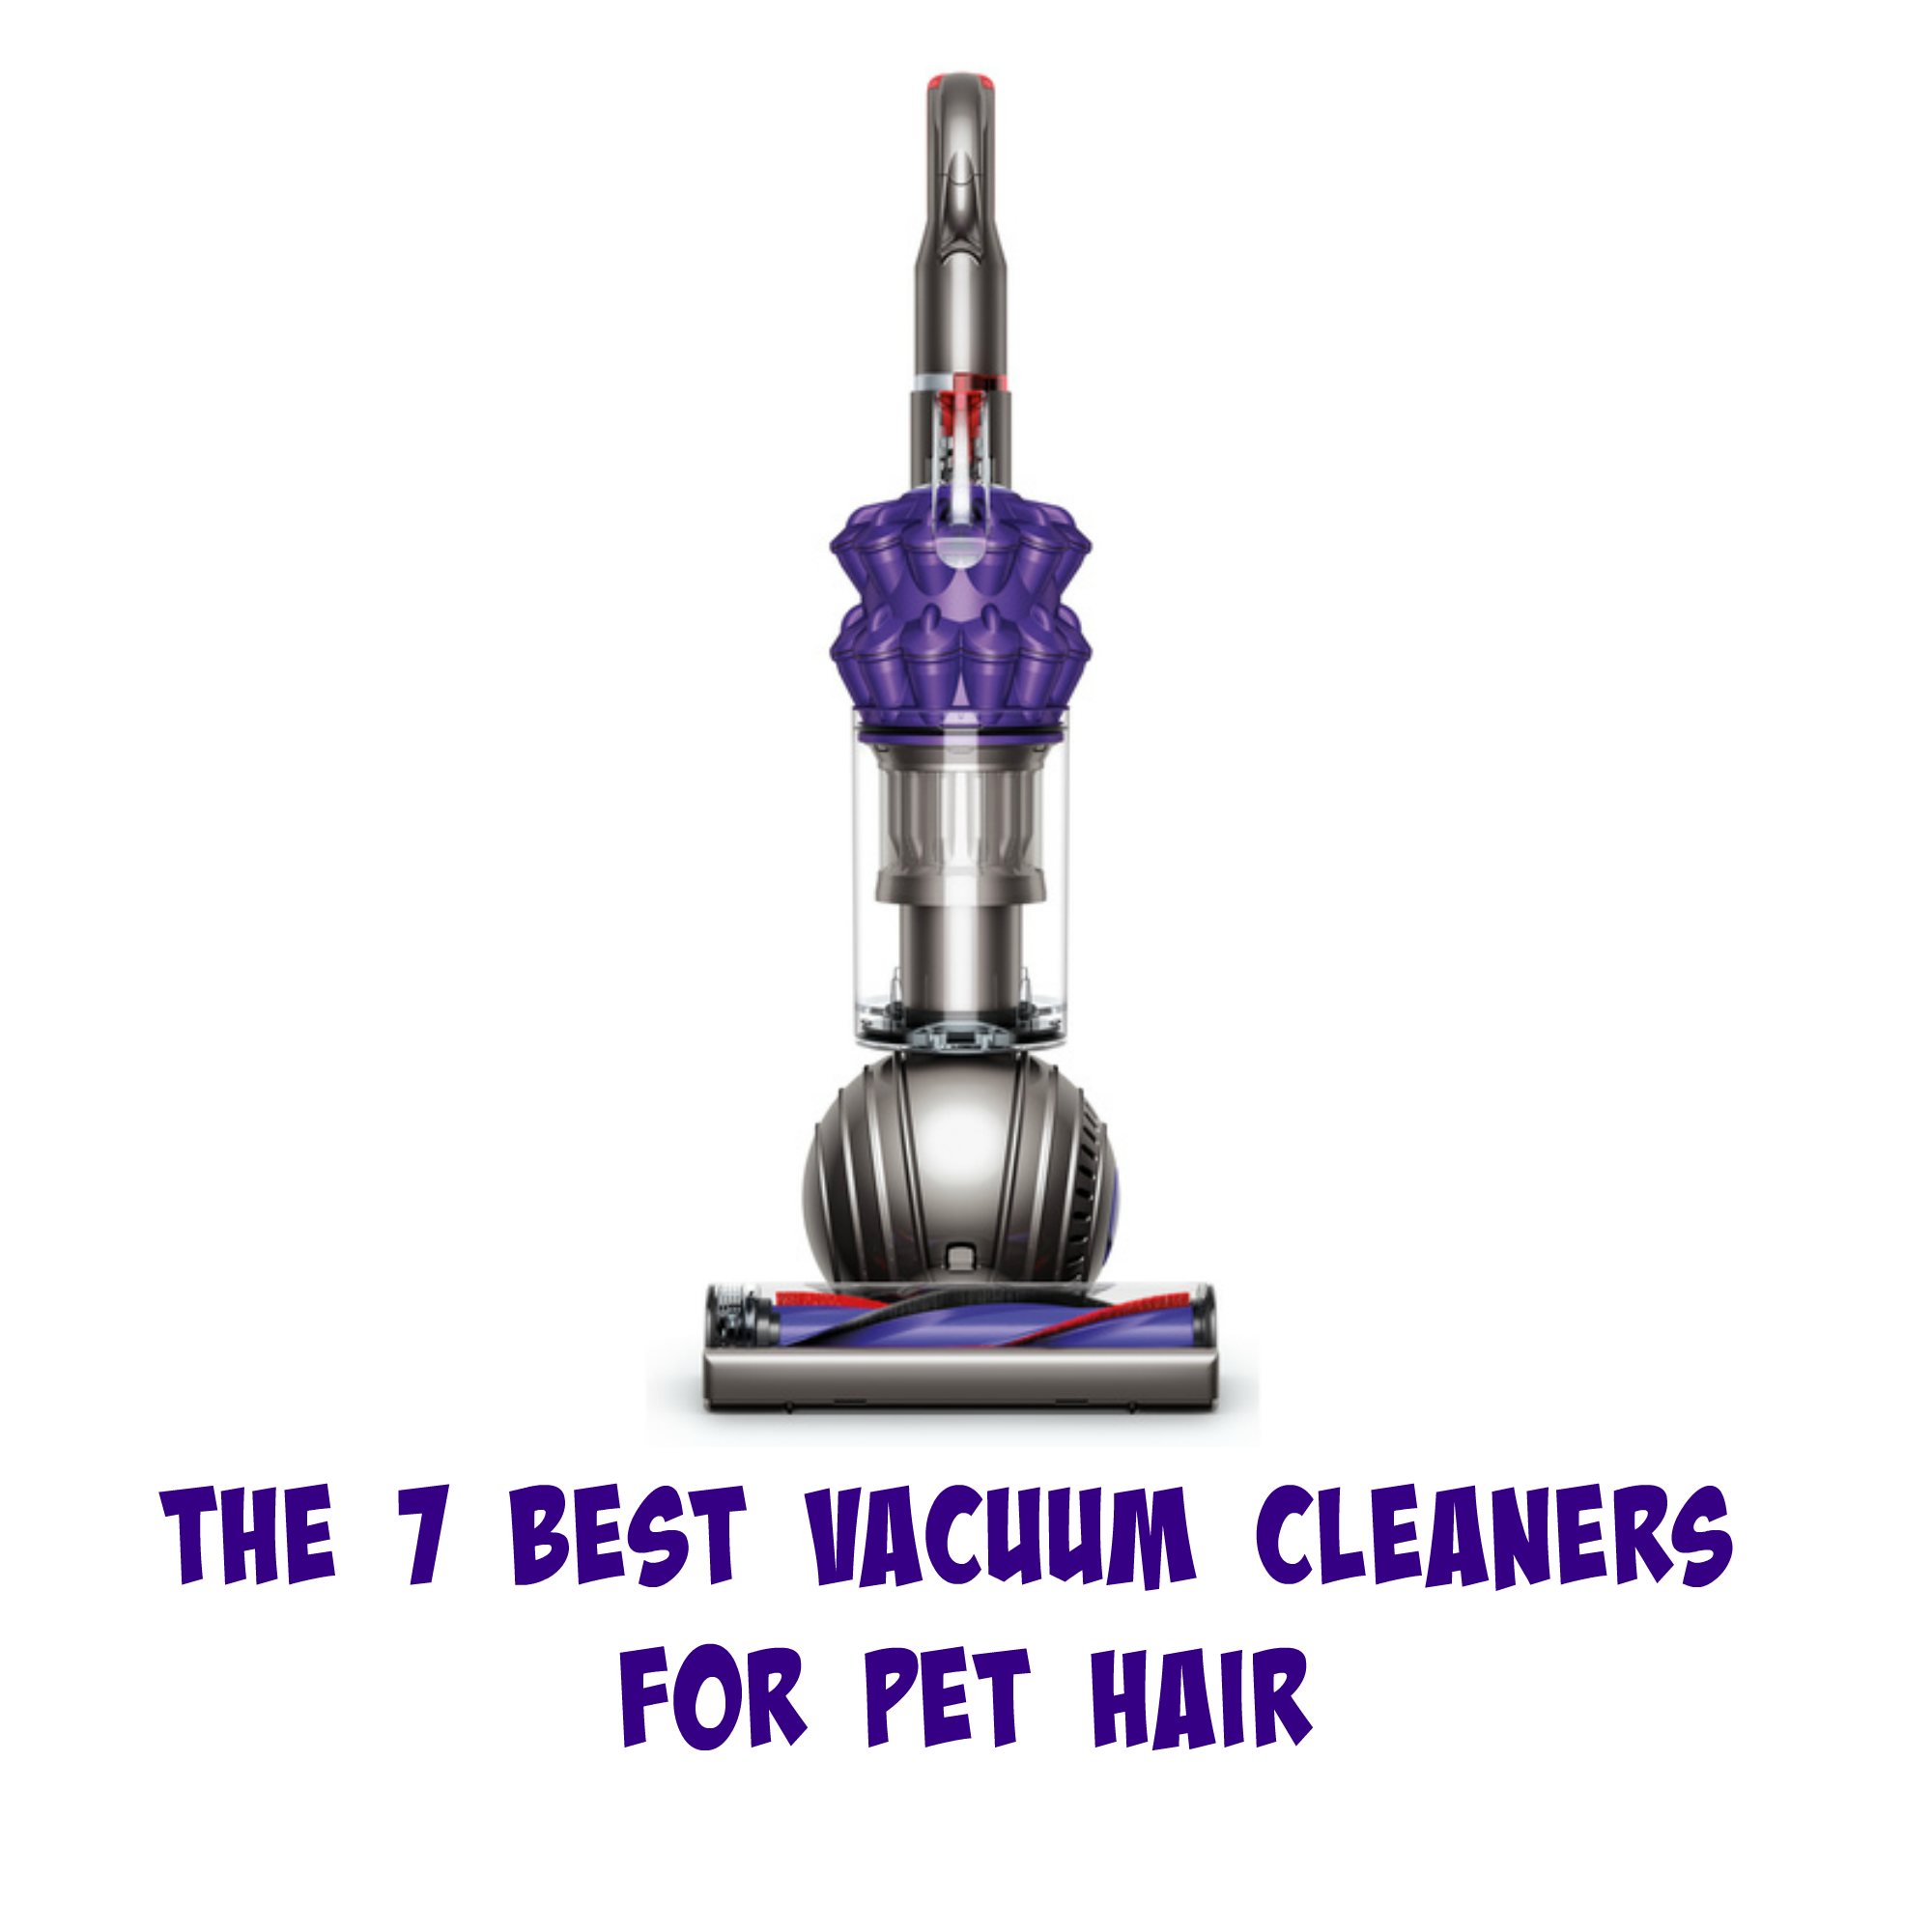 The 7 Best Vacuum Cleaners For Pet Hair Mybrownnewfiescom